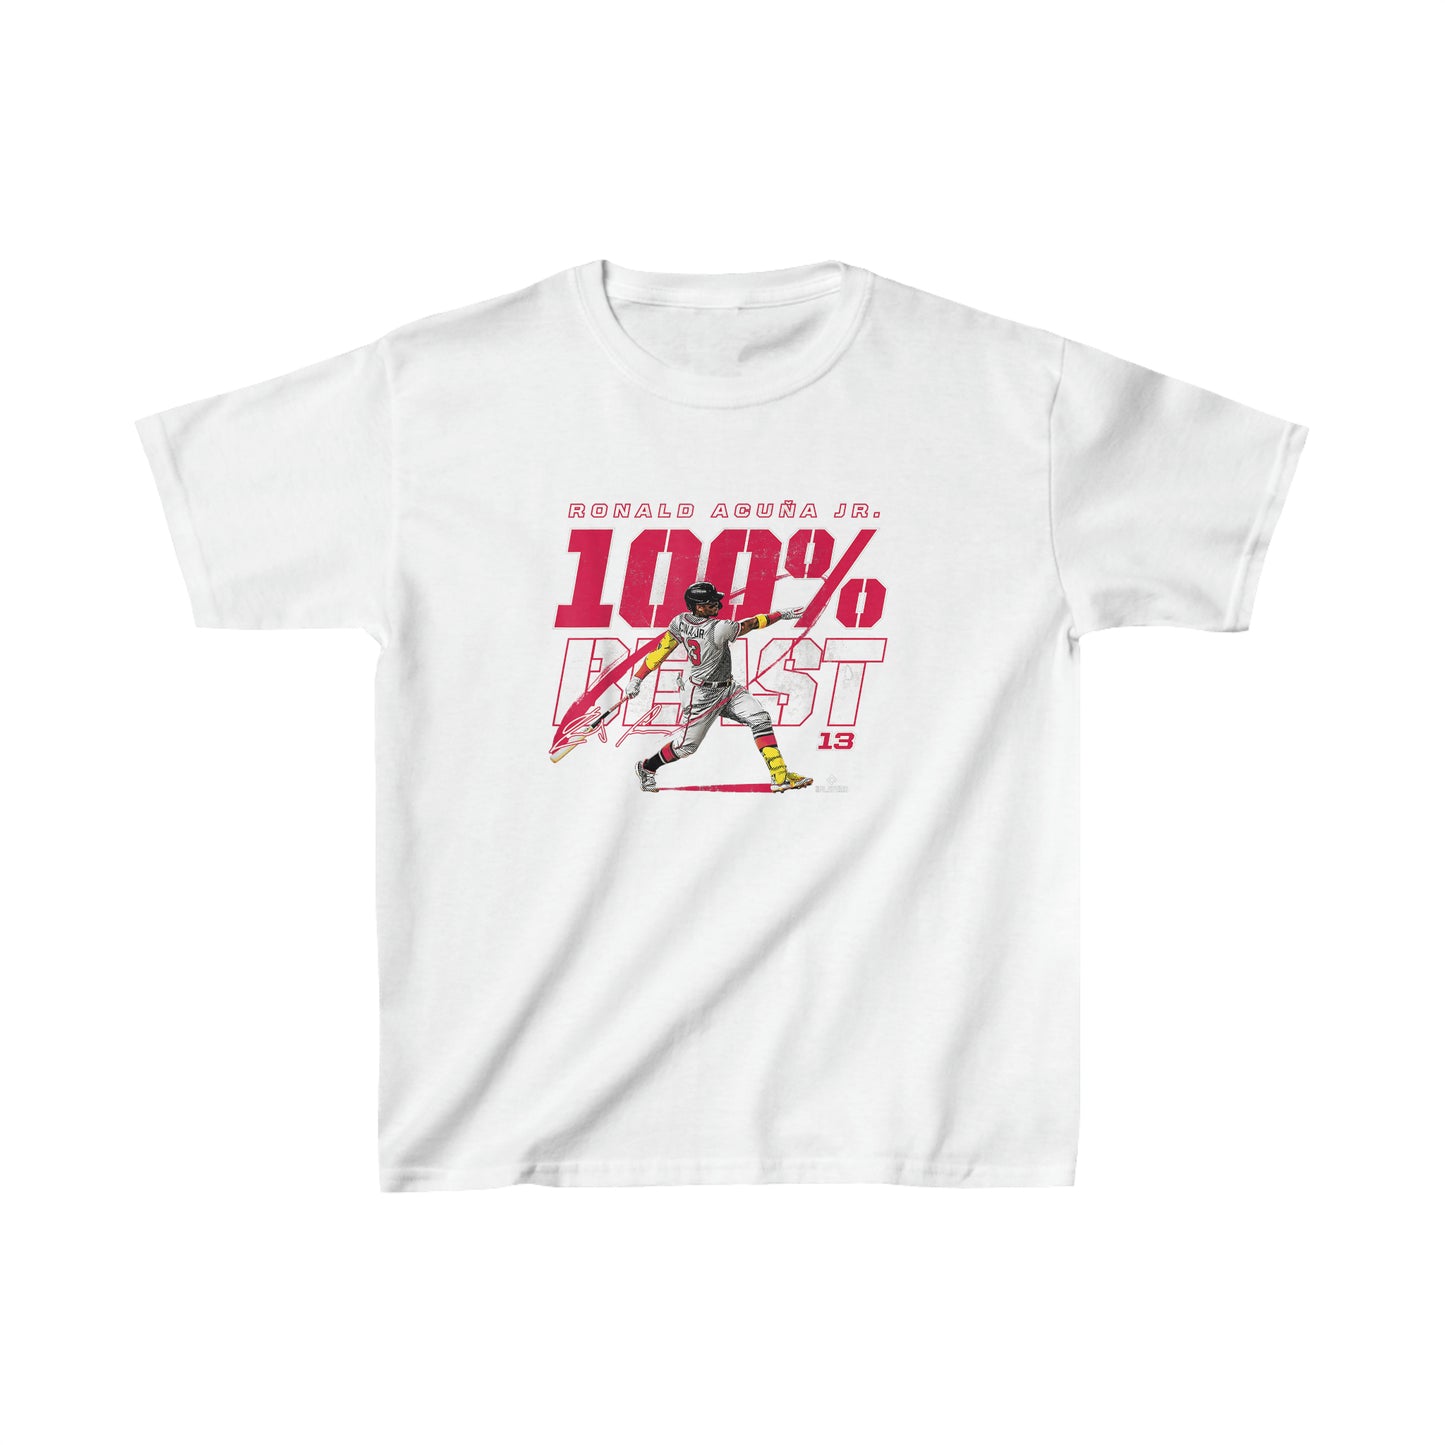 Ronald Acuña Jr. 100% BEAST Kids Fan T-Shirt - Soft Cotton Blend - Perfect for Young Braves Fans